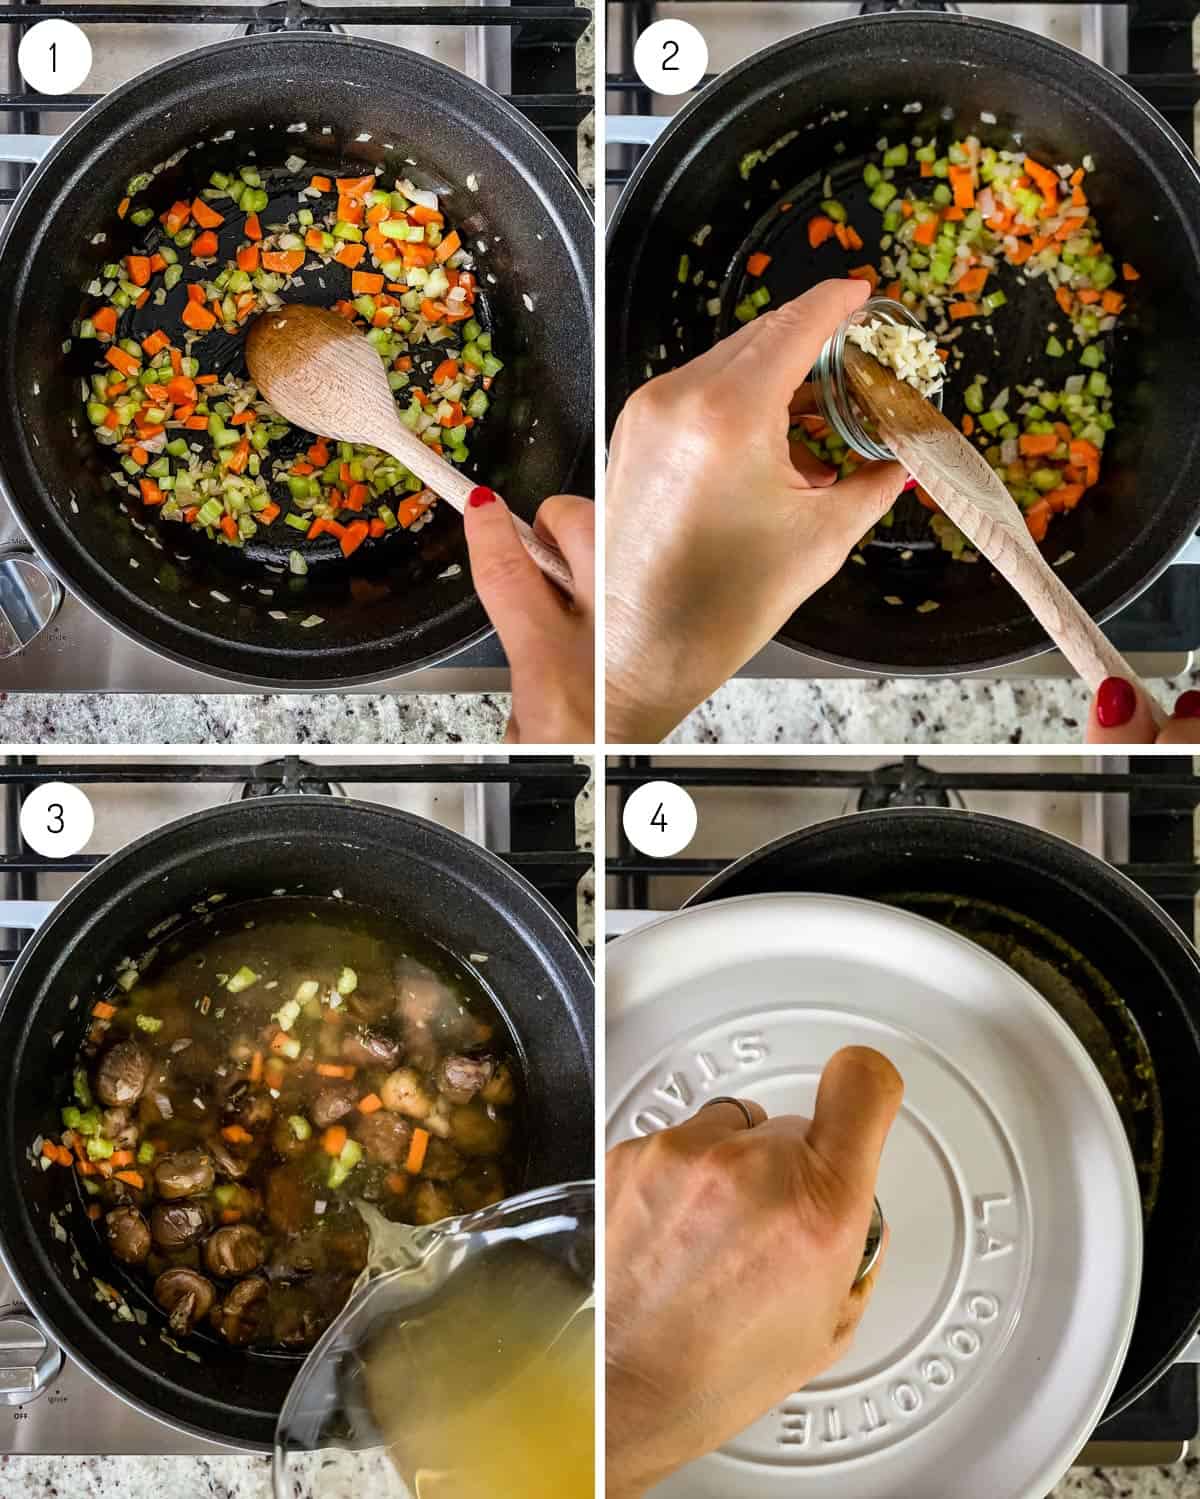 A person showing how to cook vegetables in a dutch oven from the top view.